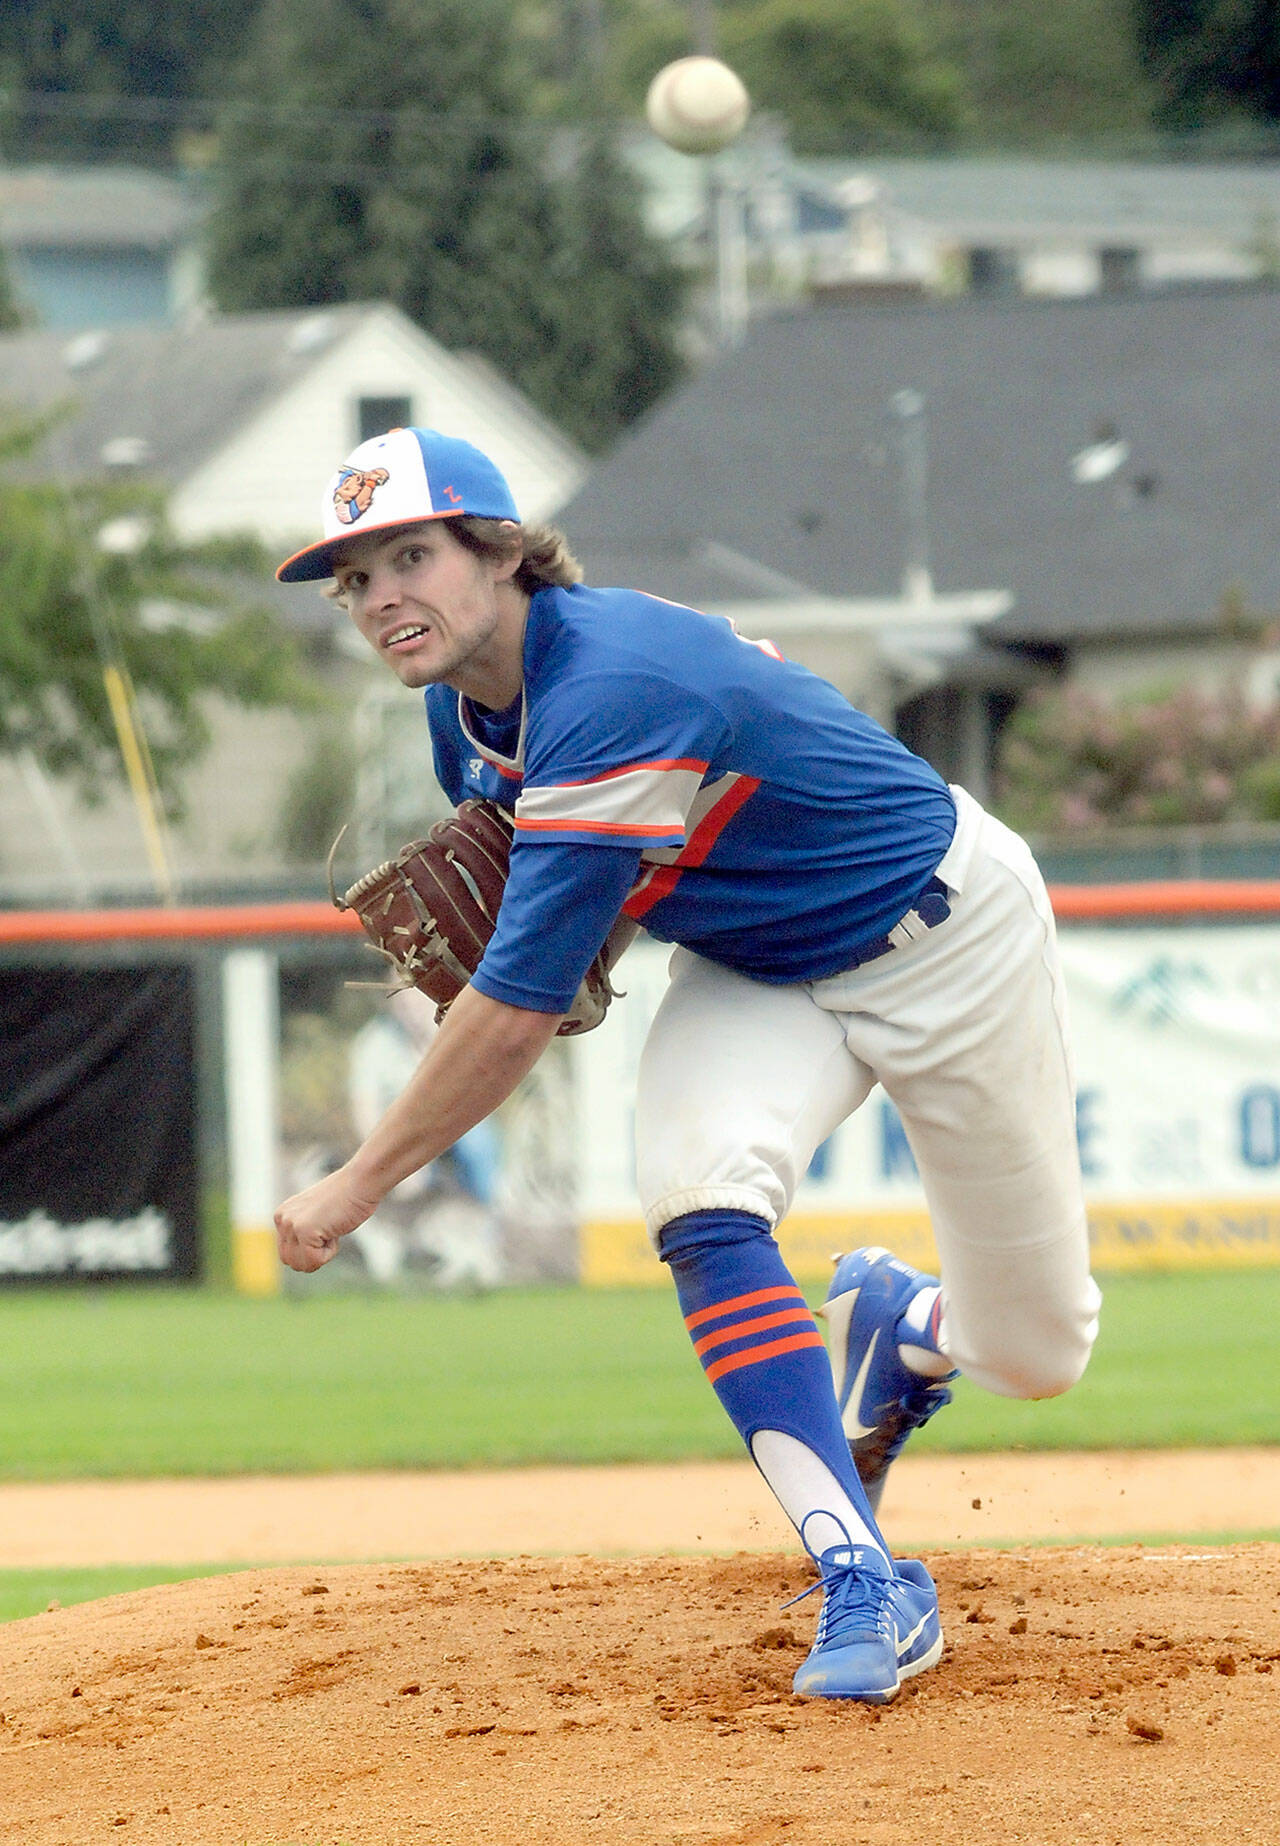 Lefties pitcher Dillon Dibrell throws in the first inning in the first game of a doubleheader against Kamloops in 2022 at Port Angeles Civic Field. (Keith Thorpe/Peninsula Daily News)